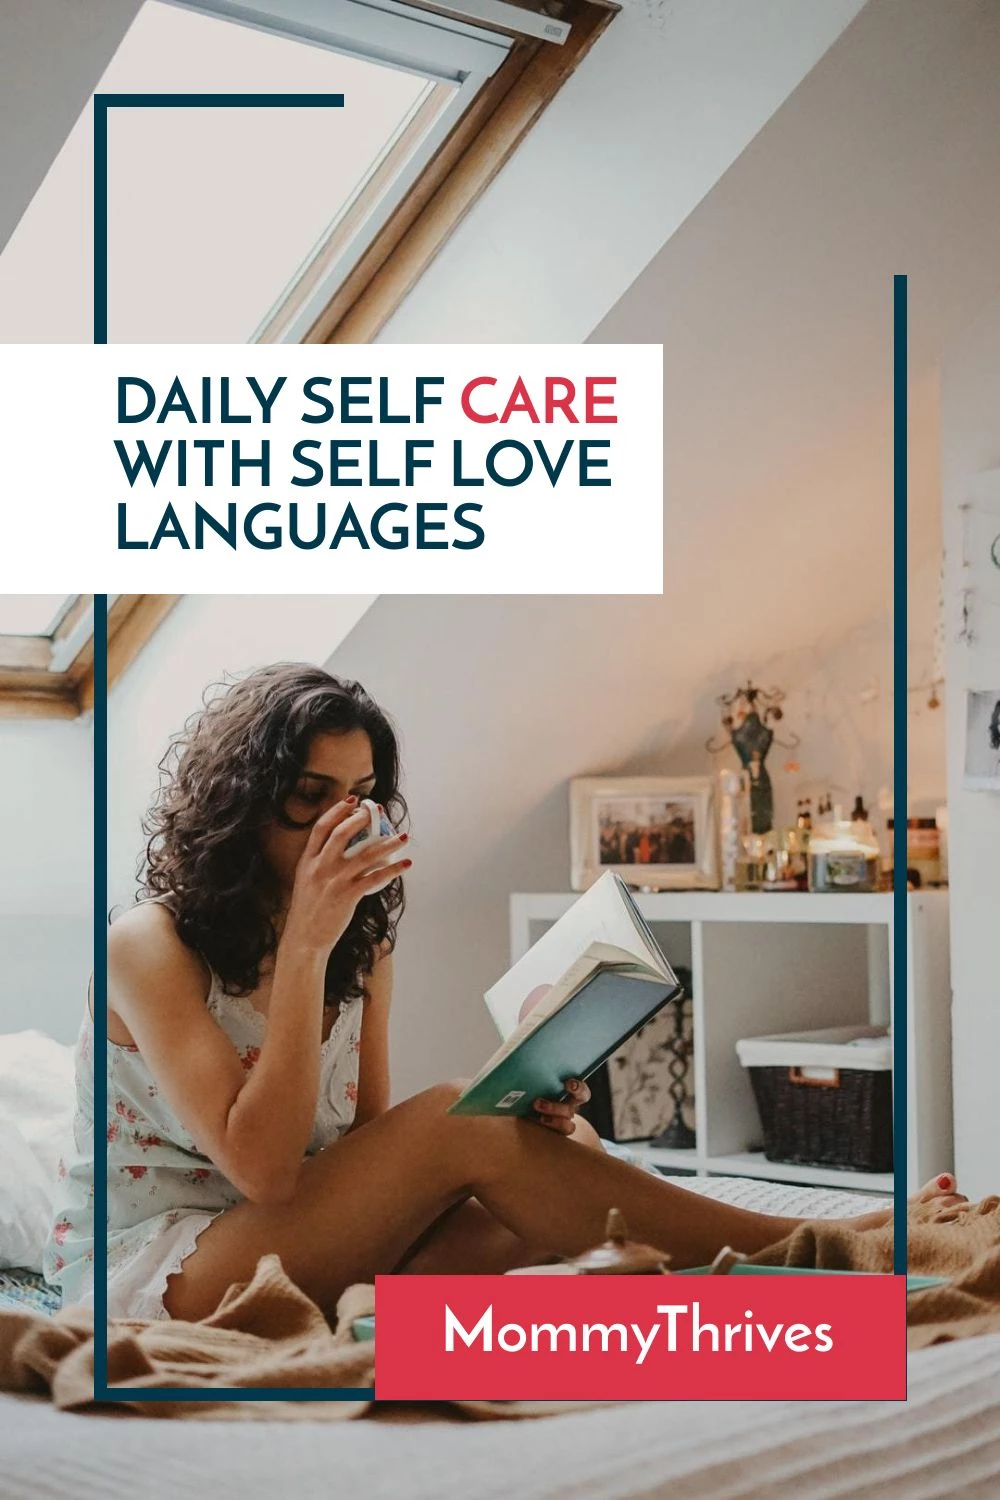 Daily Self Care Routine - Everyday Self Care Routine Using Your Love Language - Love Language Self Care Tips